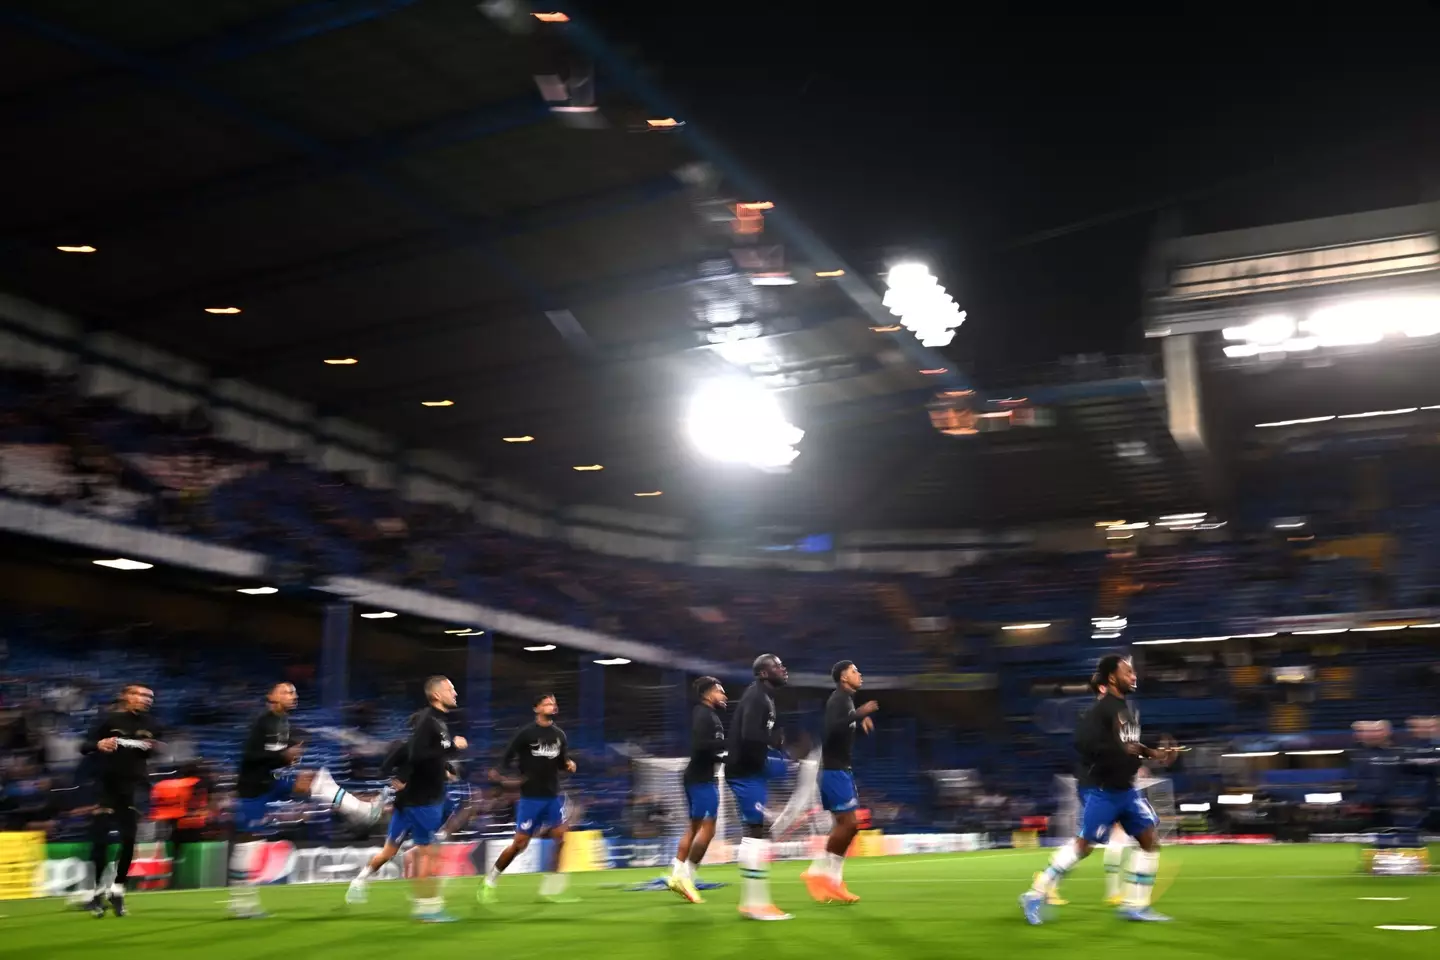 General view of Chelsea players during the warm up before the match. (Alamy)